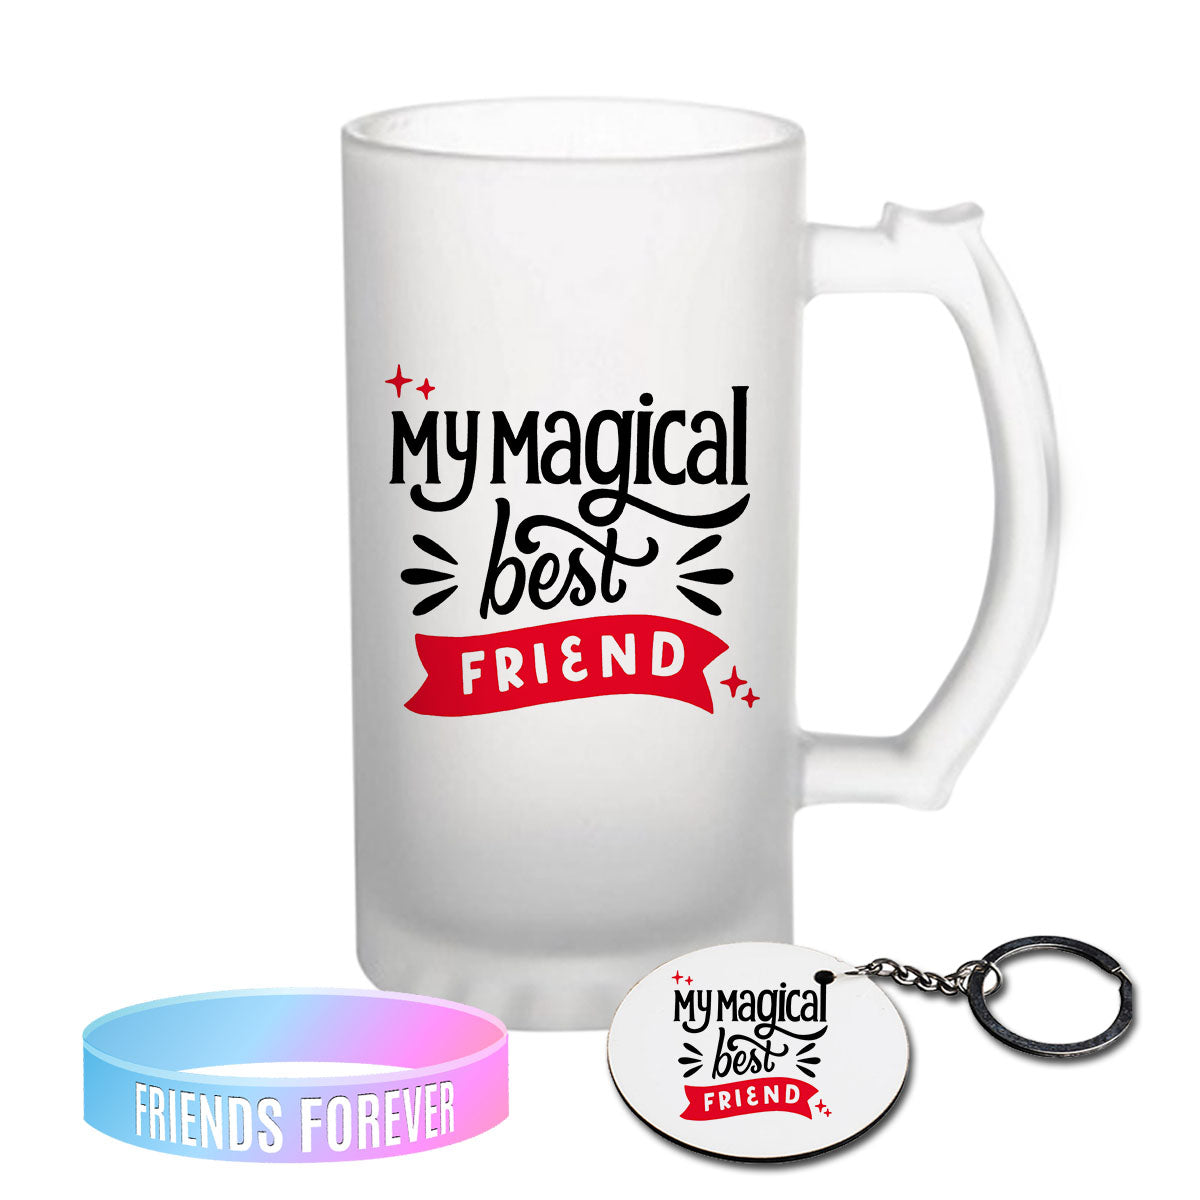 Chillaao My Magical Friends Frosted Beer Mug